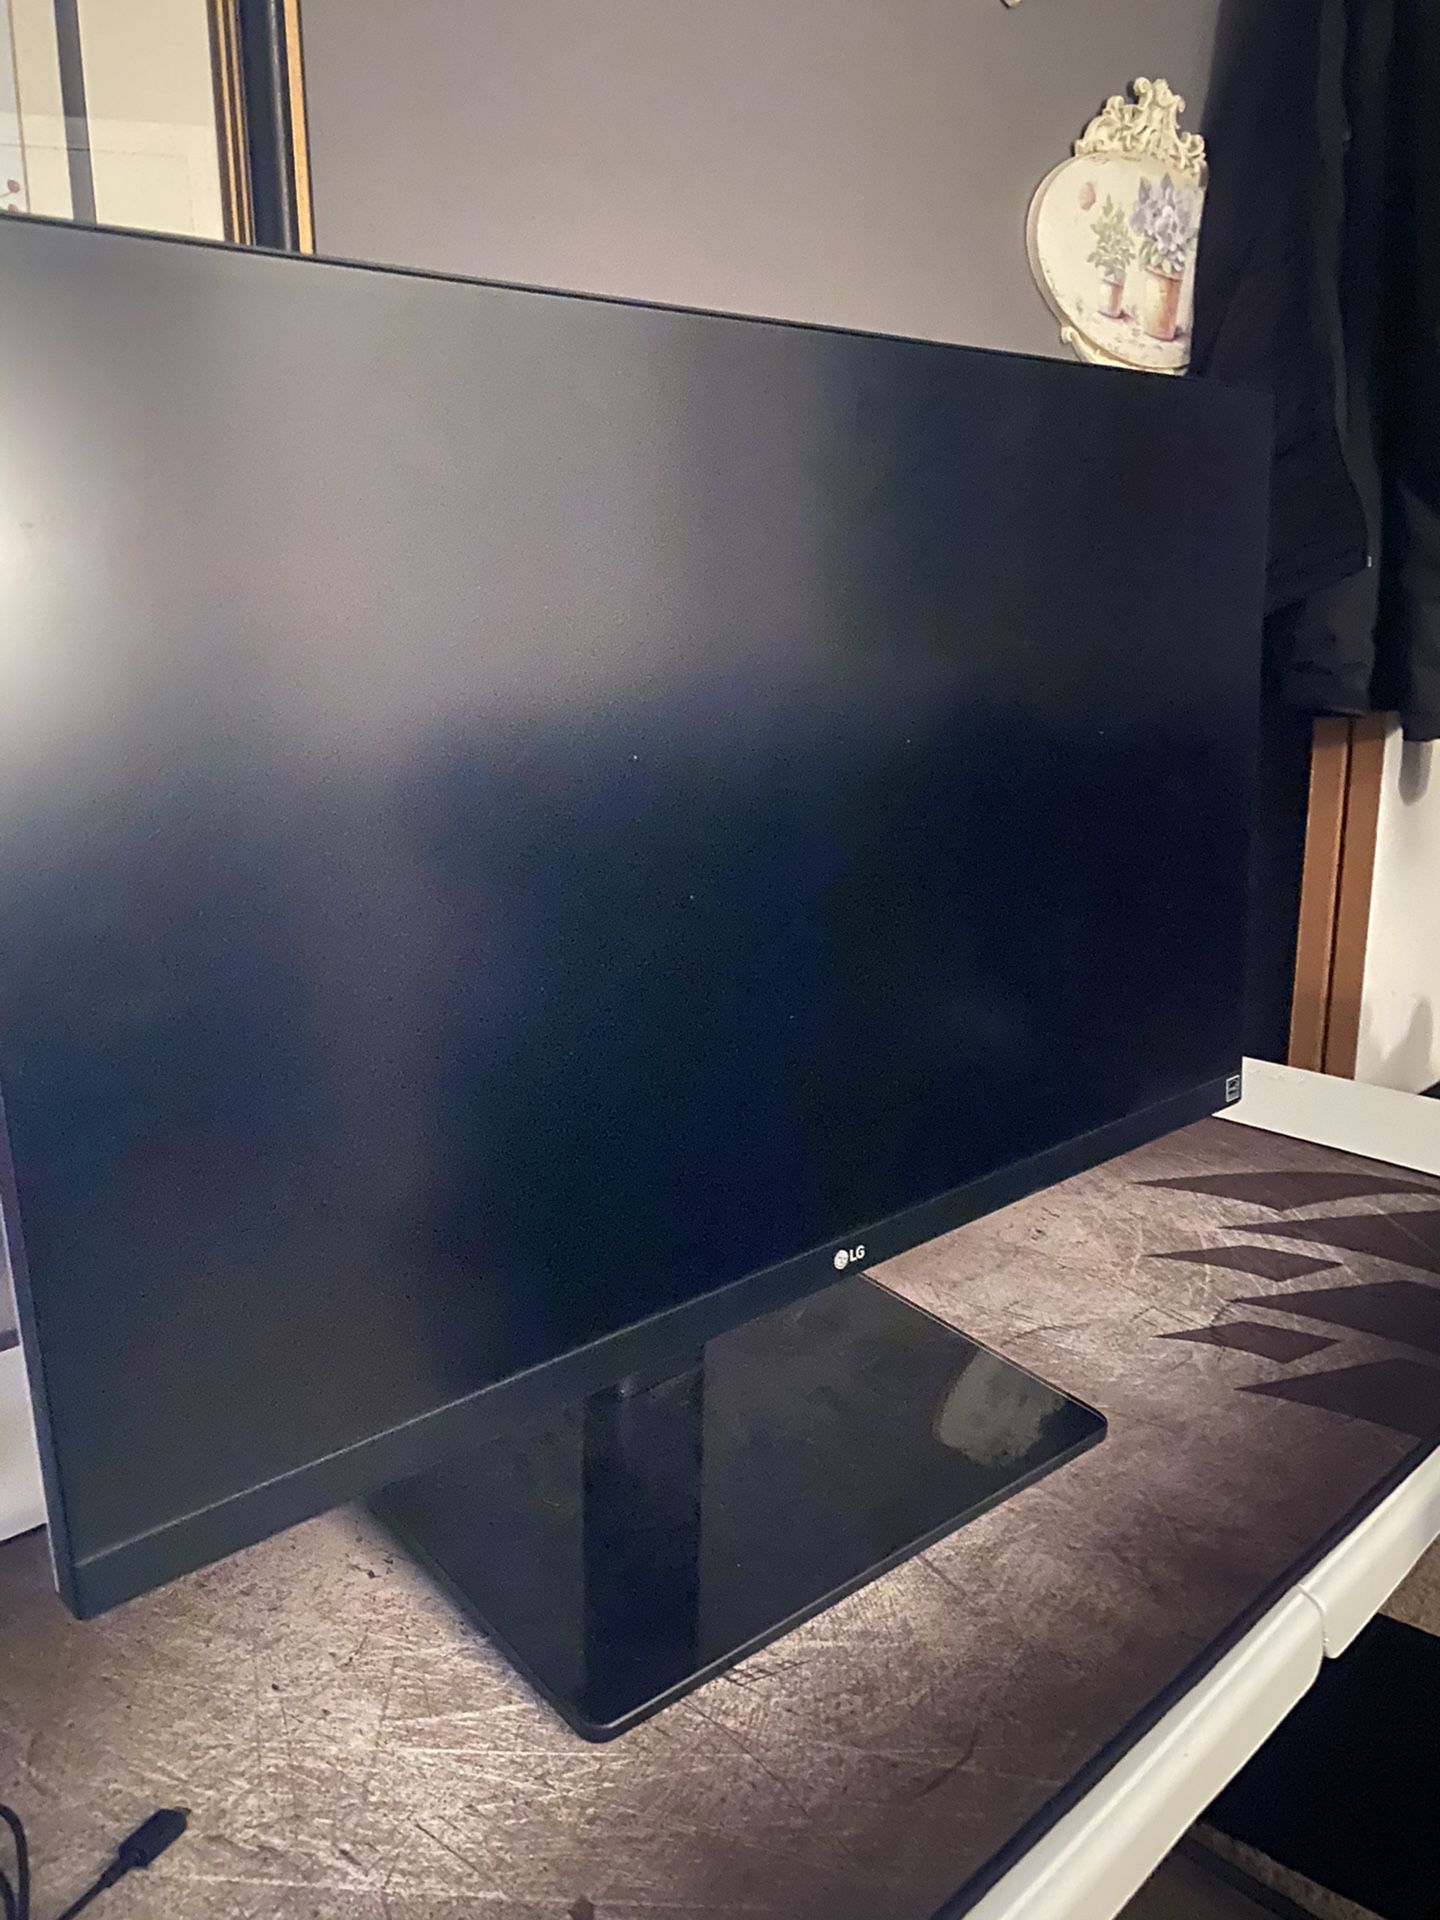 LG 4k HDR 27” Monitor MUST BE GONE BY 4th